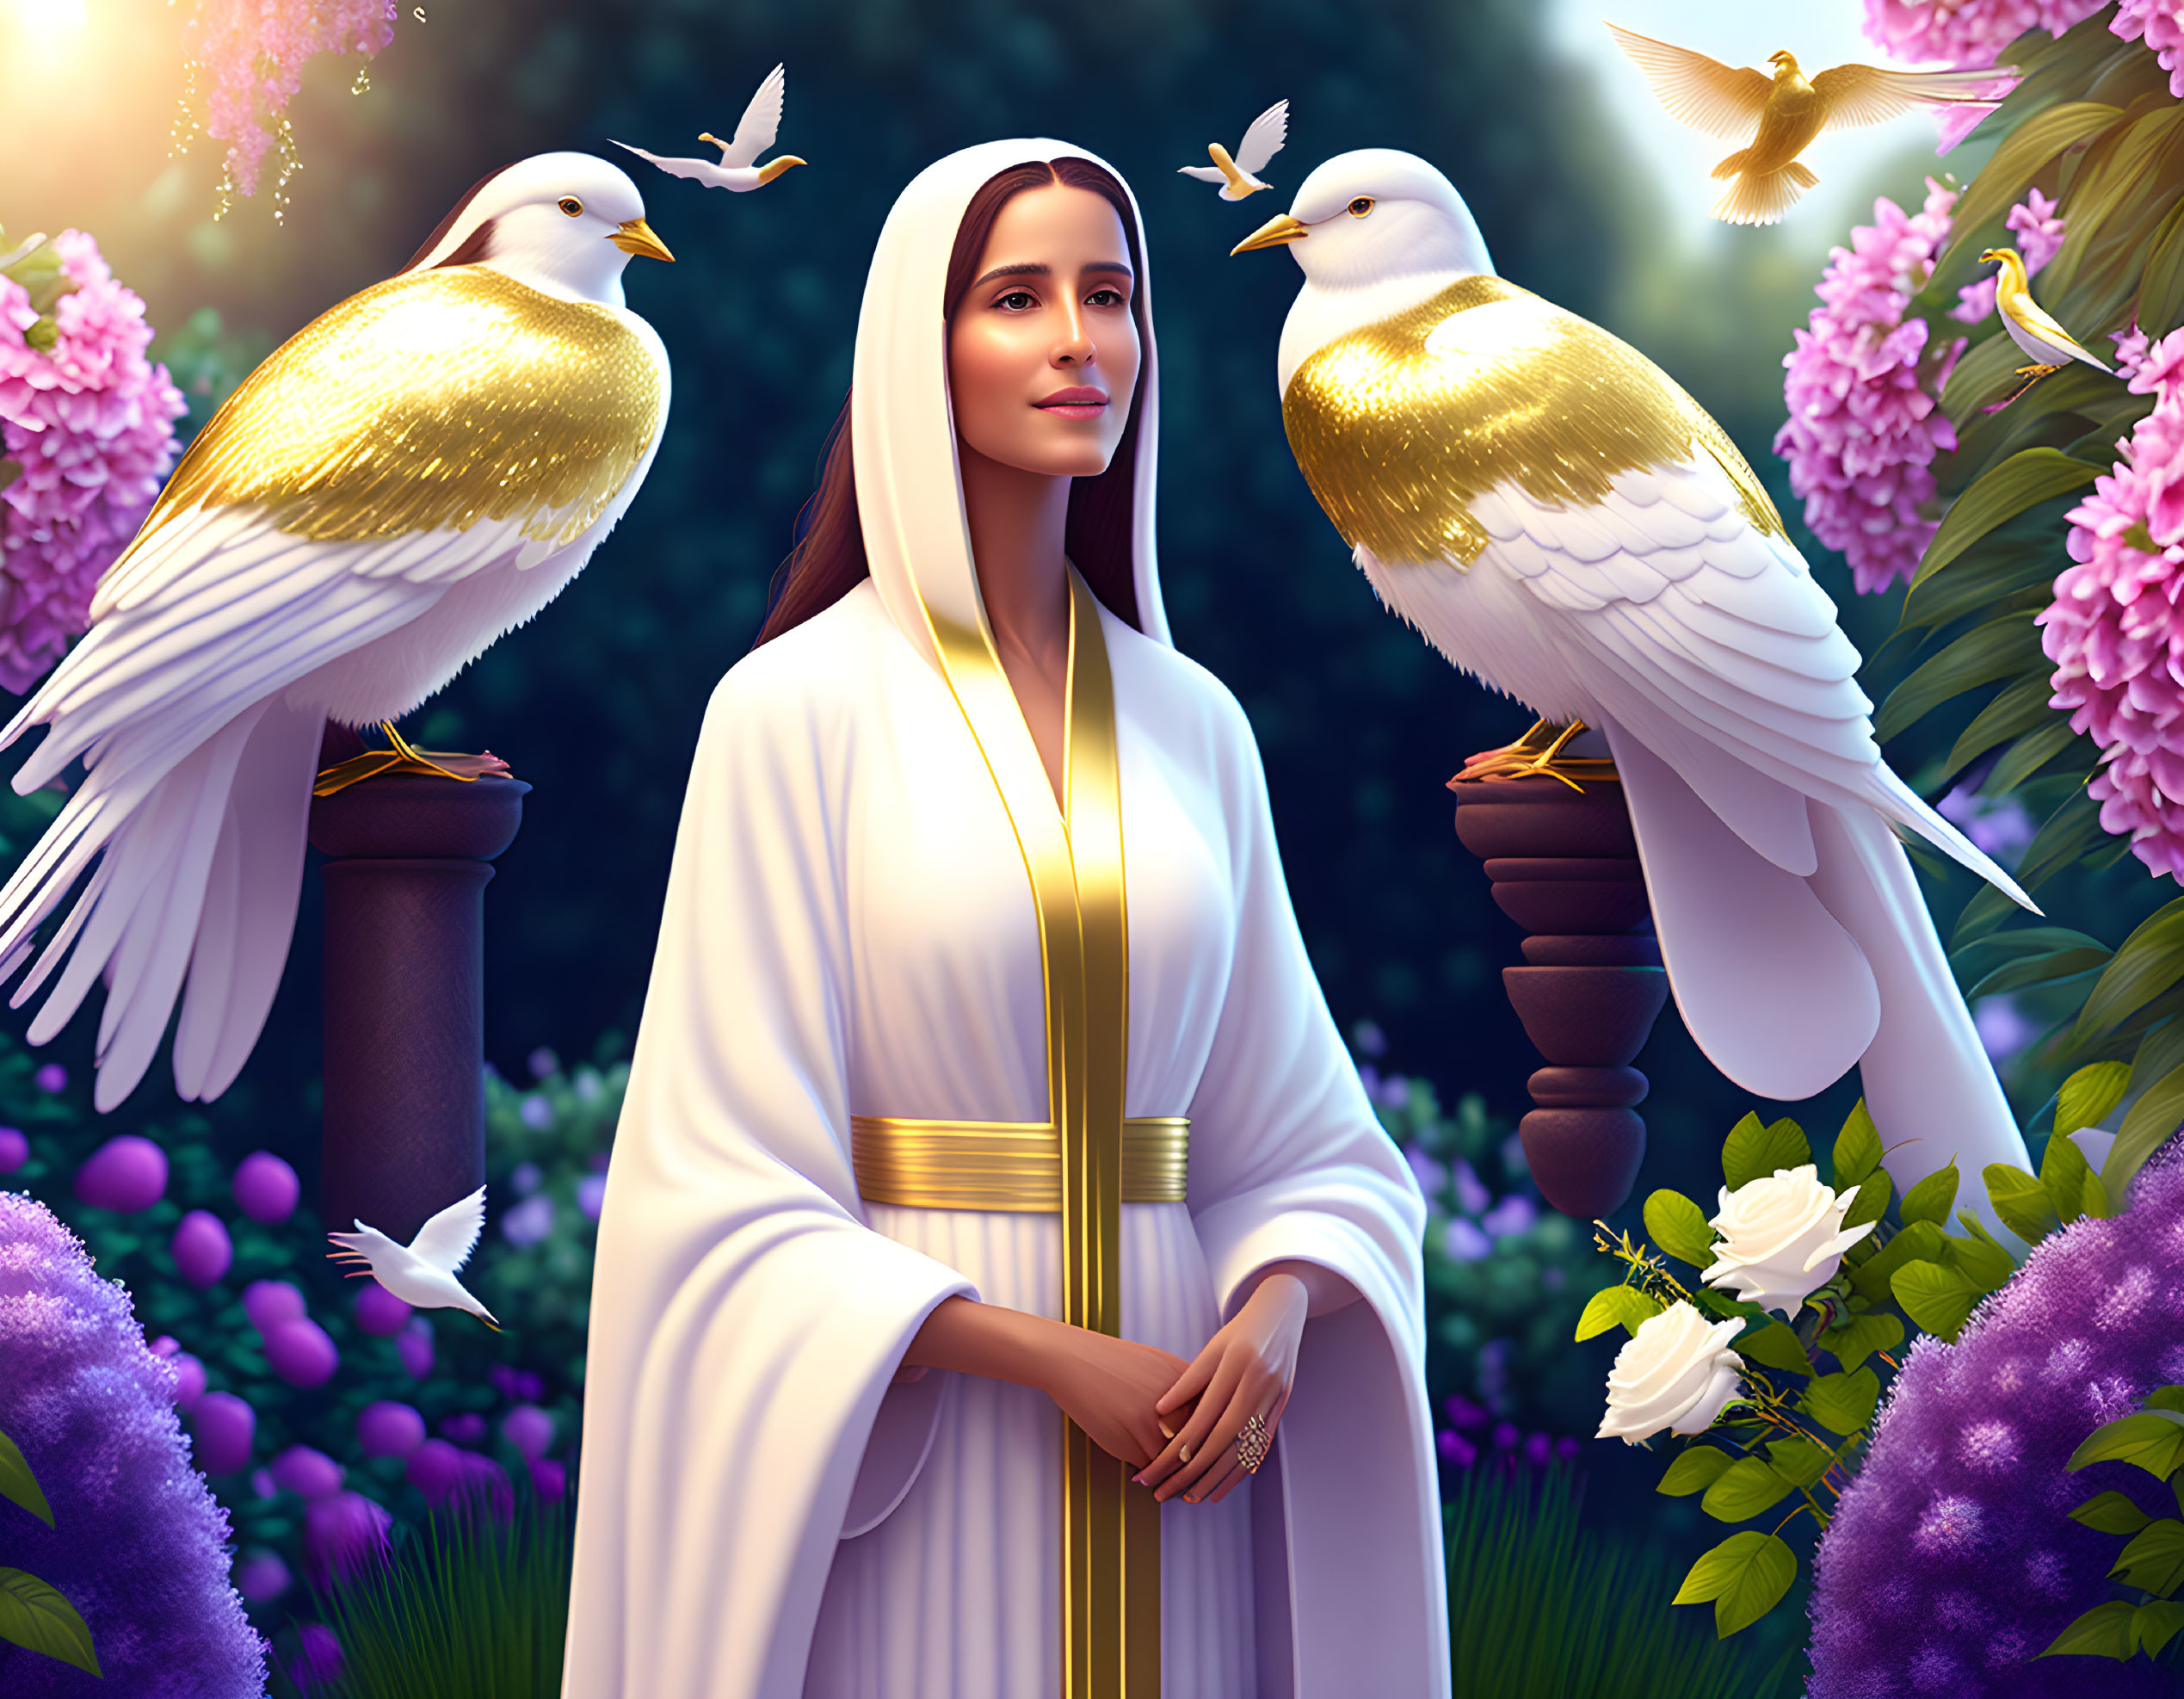 Serene woman in white robe surrounded by golden birds and butterfly in vibrant garden